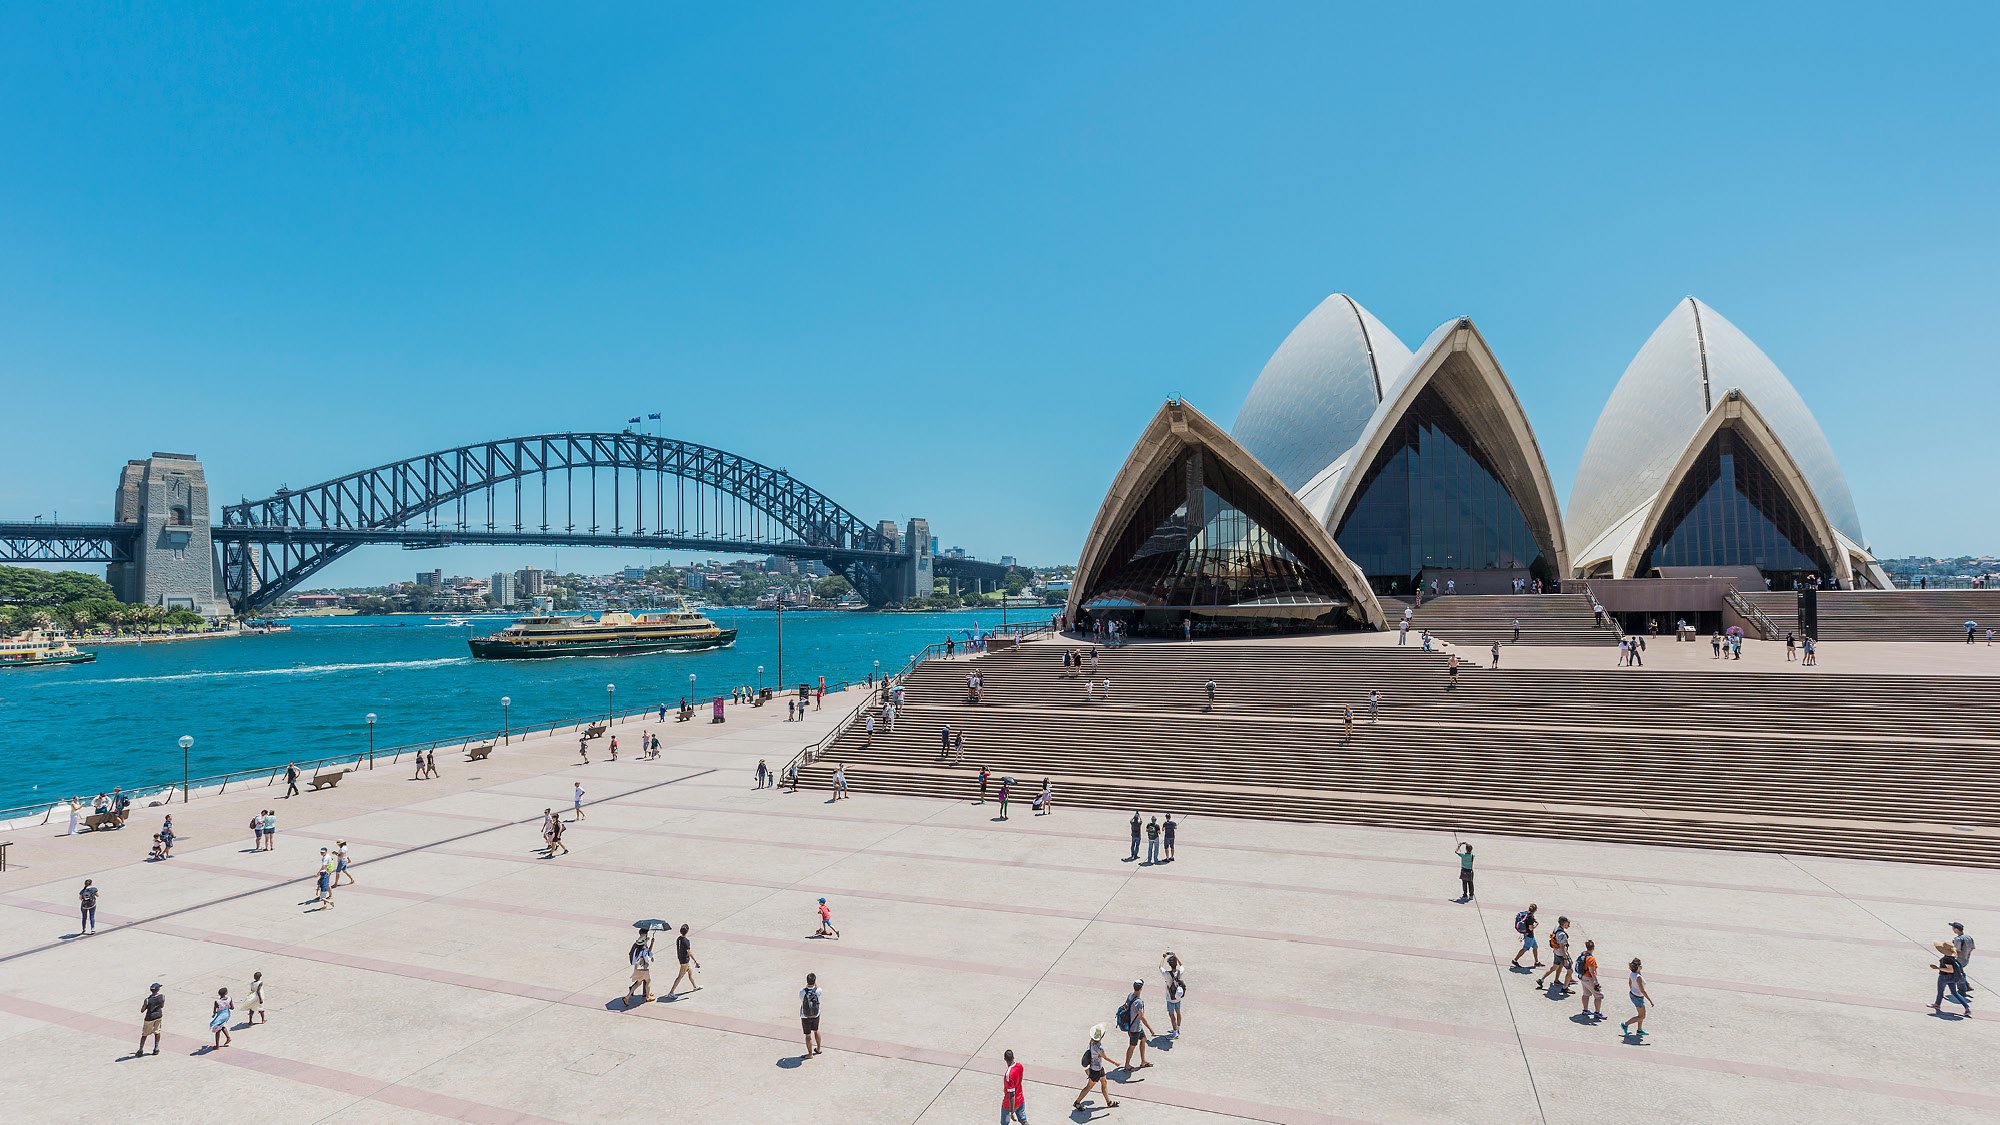 Wide angle view of the forecourt of the Sydney Opera House with people walking around